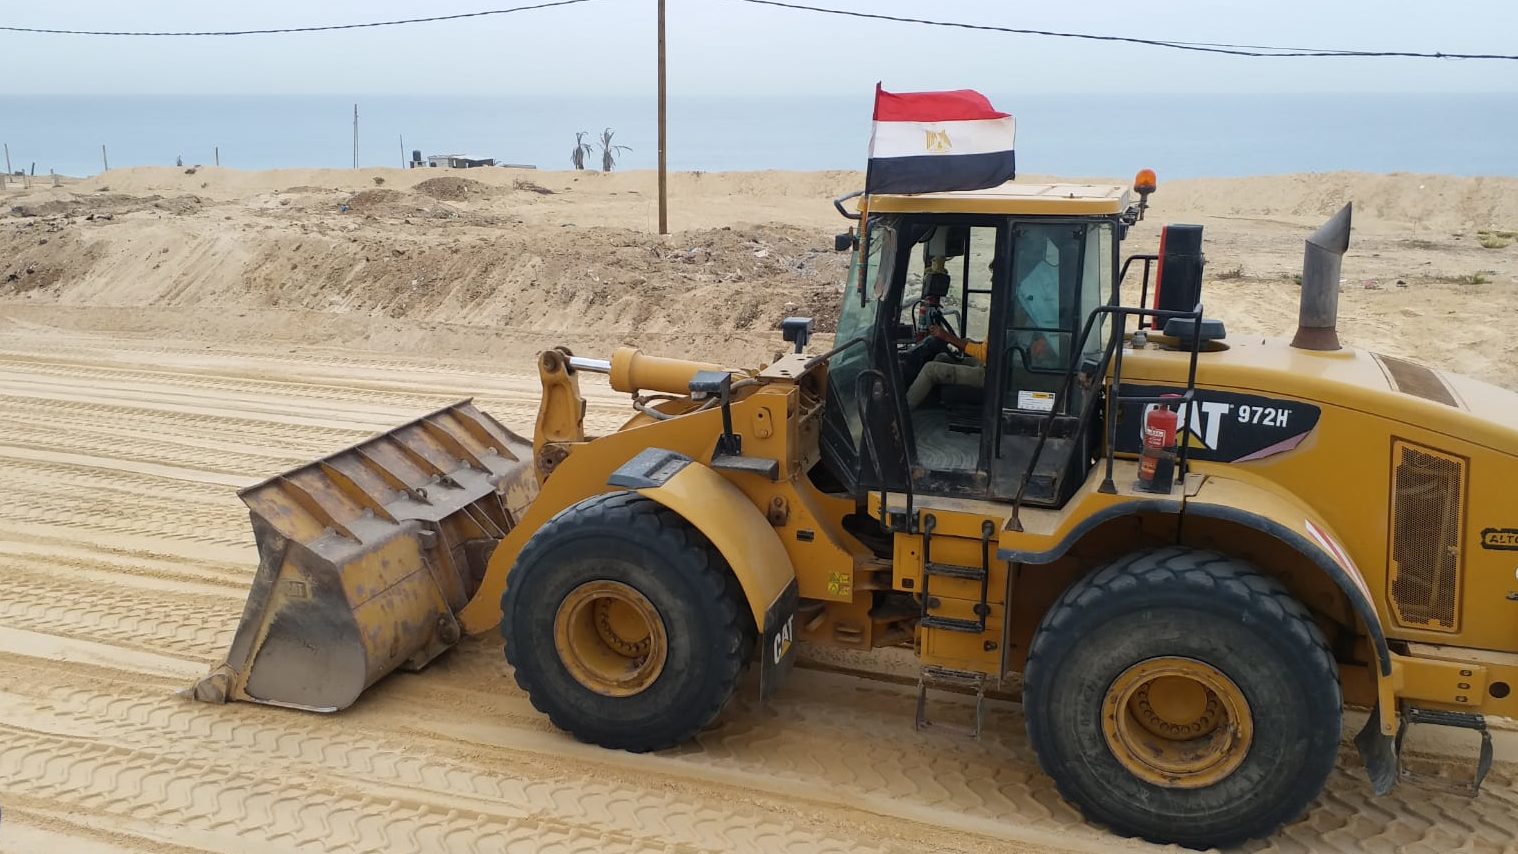 Egyptian Committee Launches Phase 2 of Gaza Reconstruction